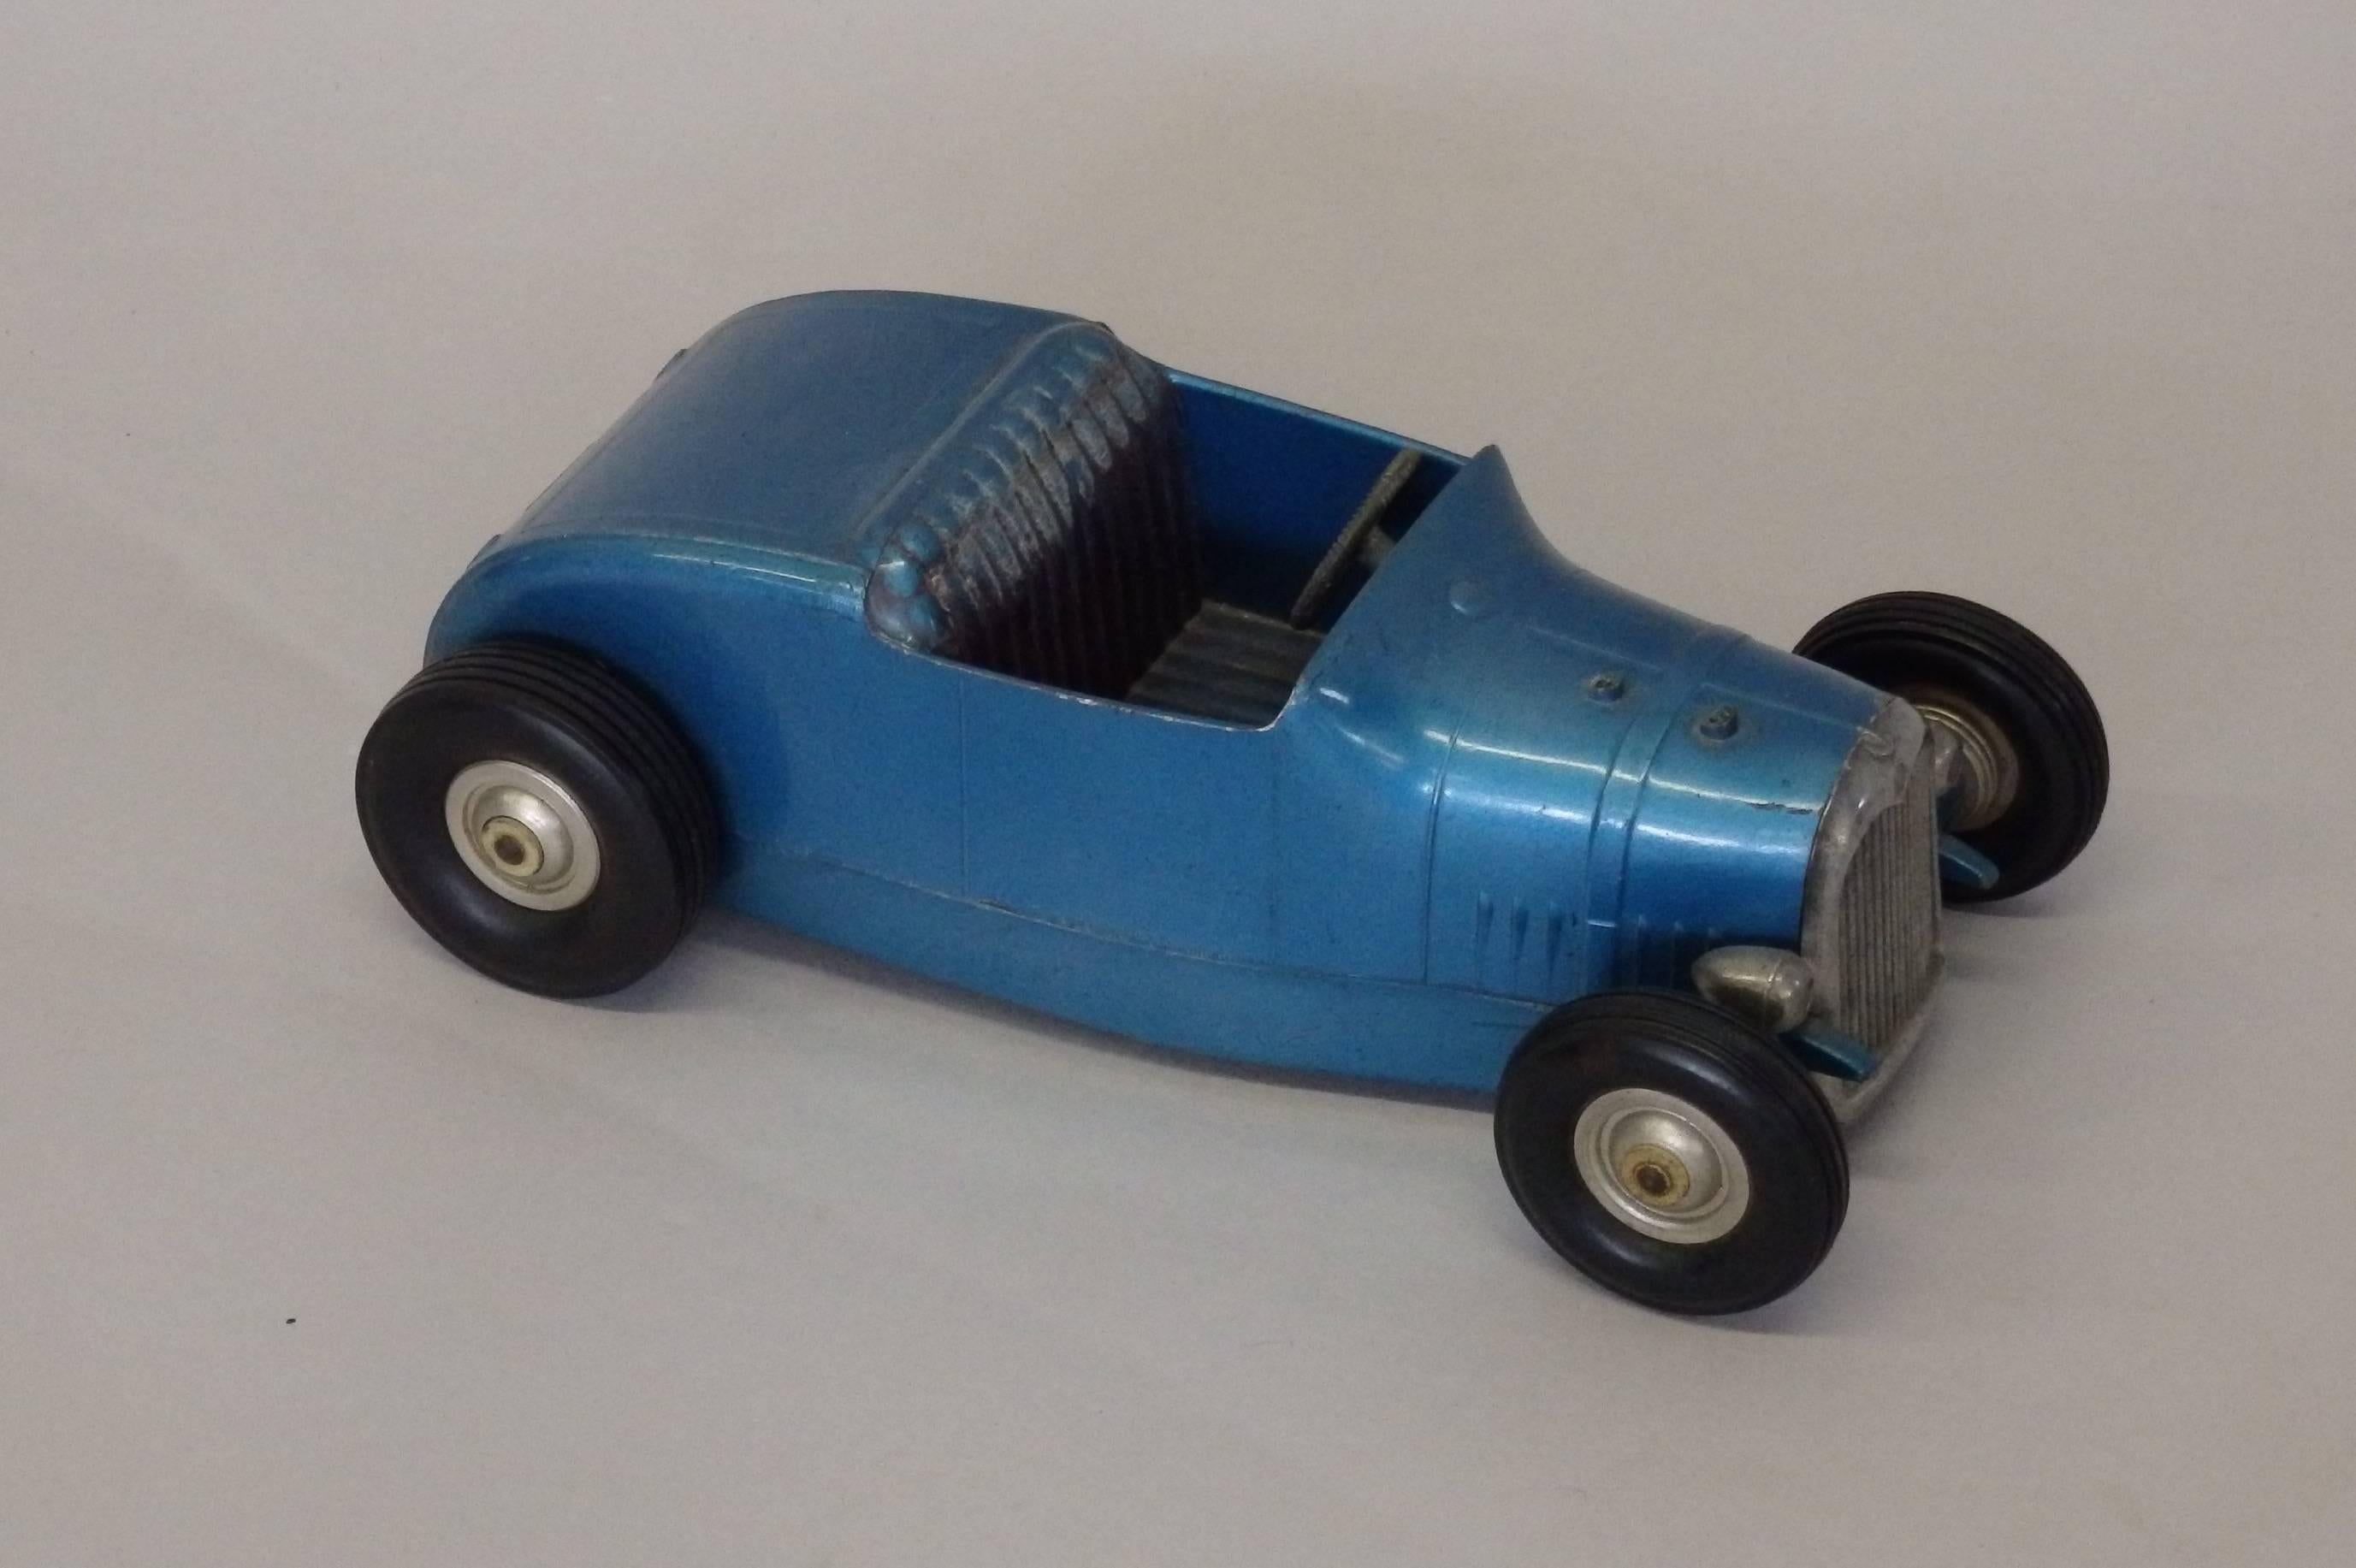 Vintage 1950-60's HERKIMER OK Cub Hot Rod Tether Car Seated Green Driver Figure 